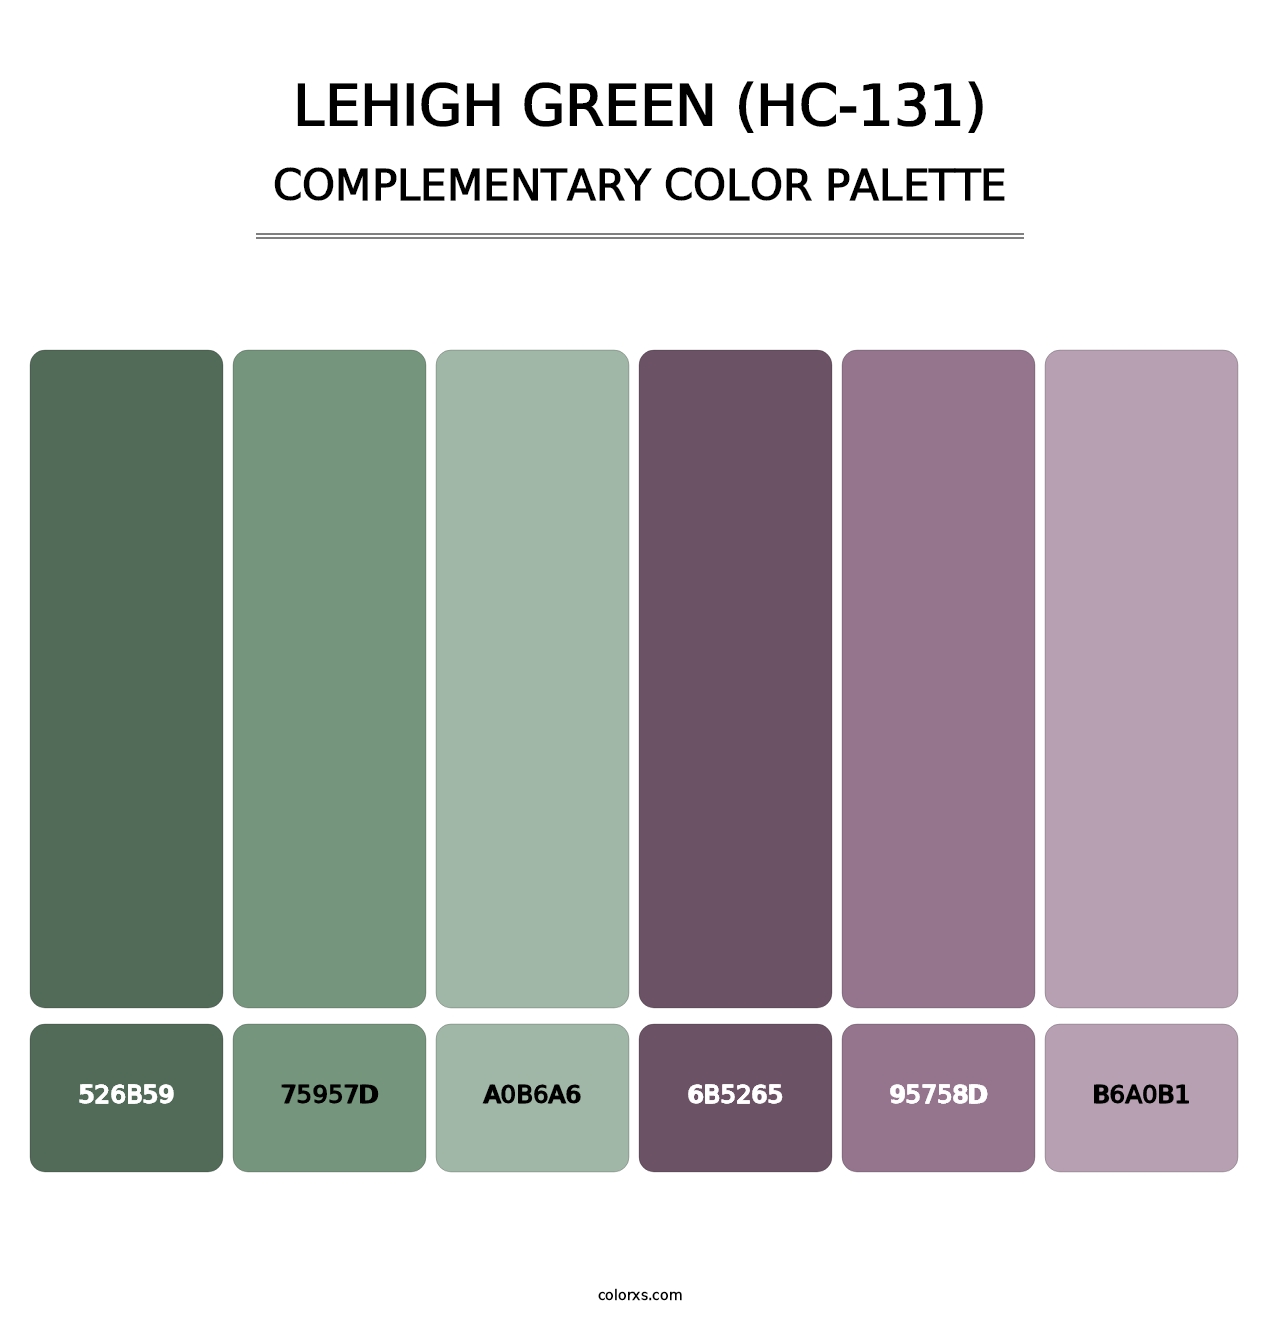 Lehigh Green (HC-131) - Complementary Color Palette